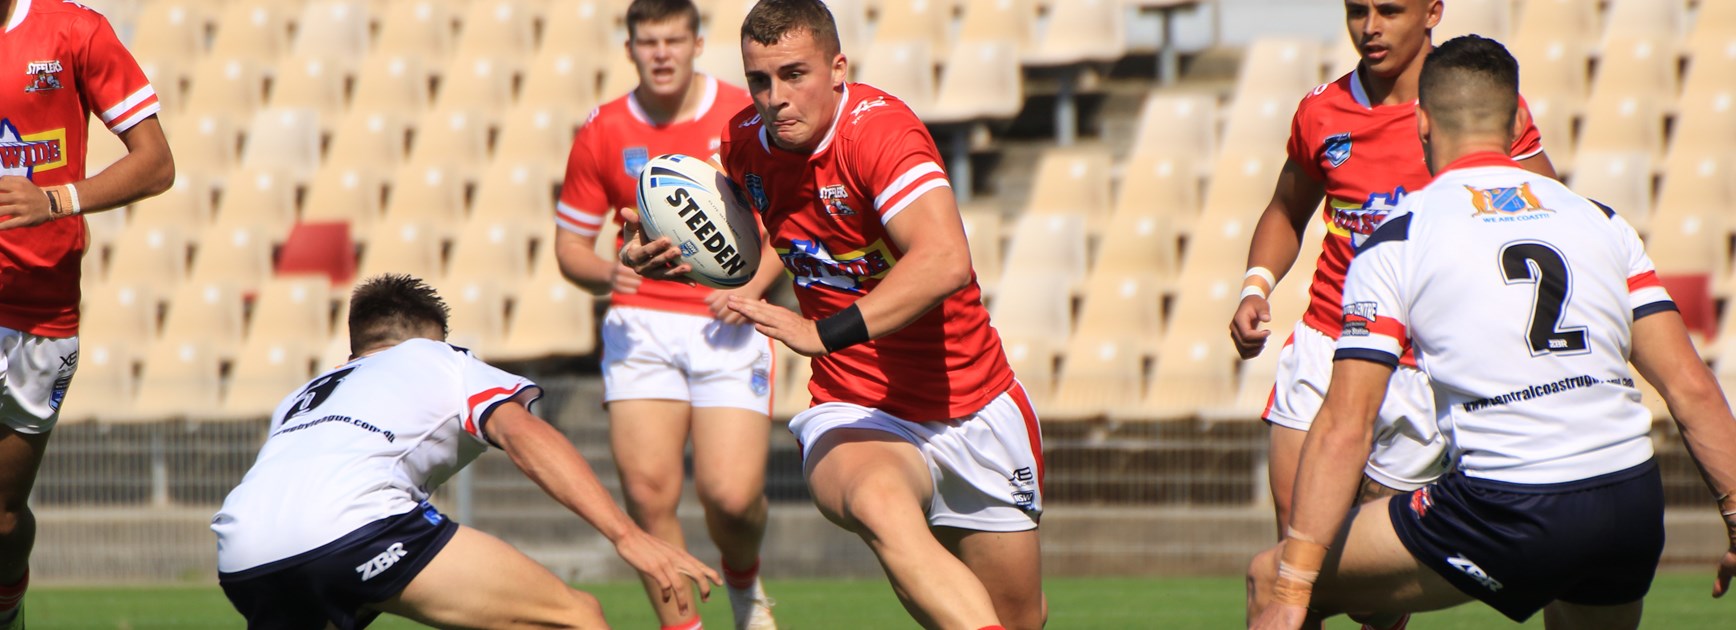 2019 SG Ball Finals Week One - Illawarra Steelers v Central Coast Roosters. Photo: Allan Barry 